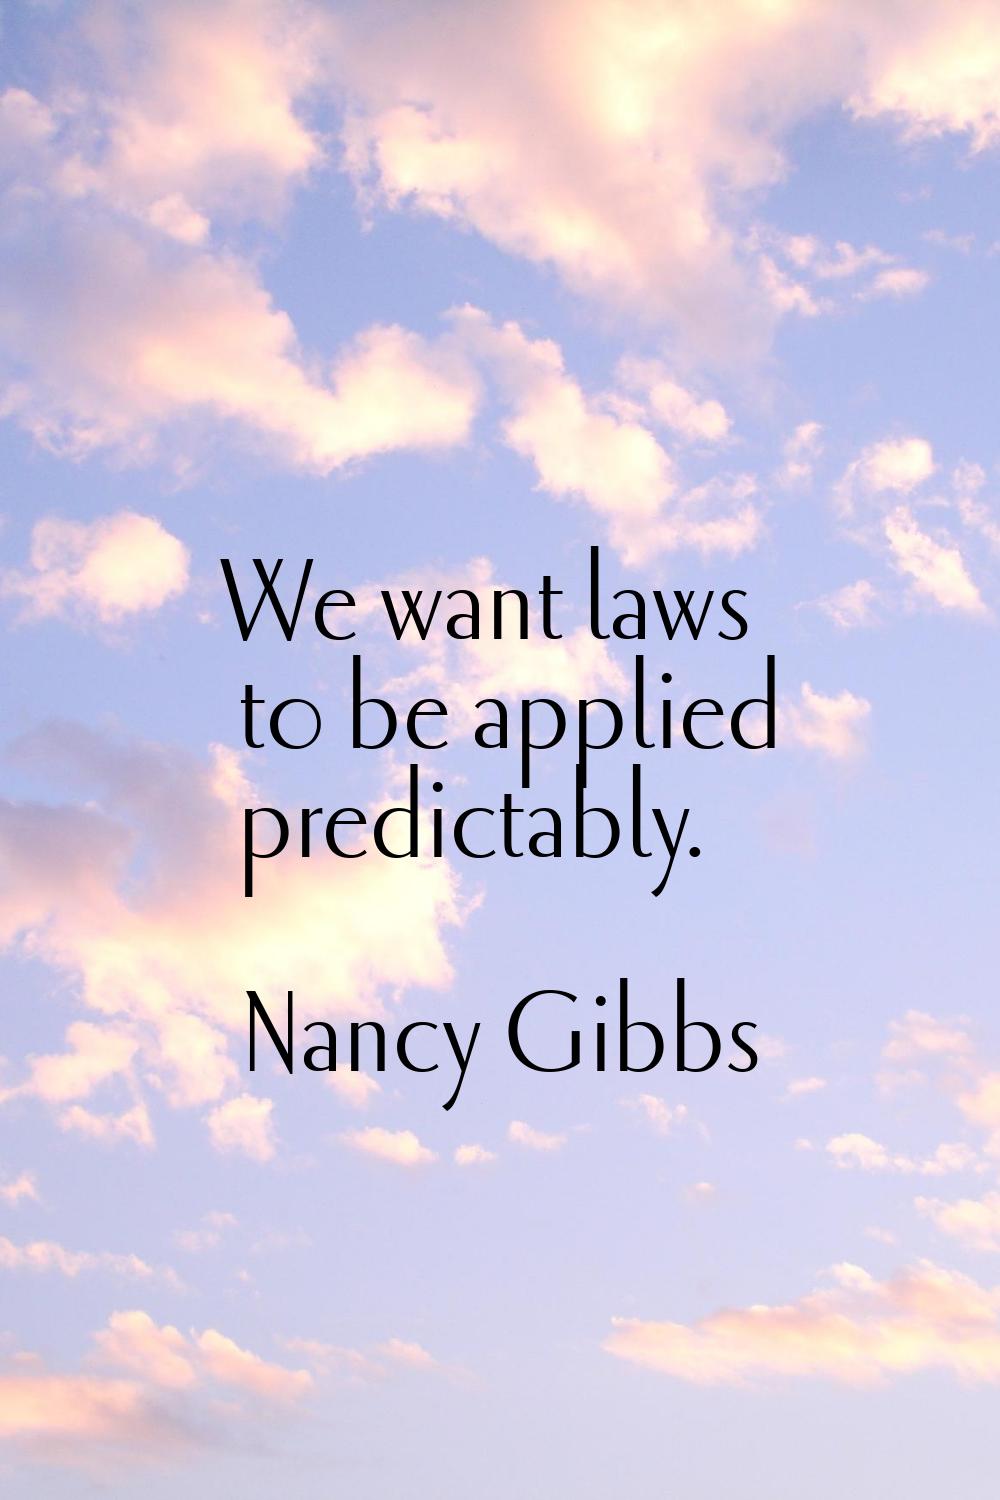 We want laws to be applied predictably.